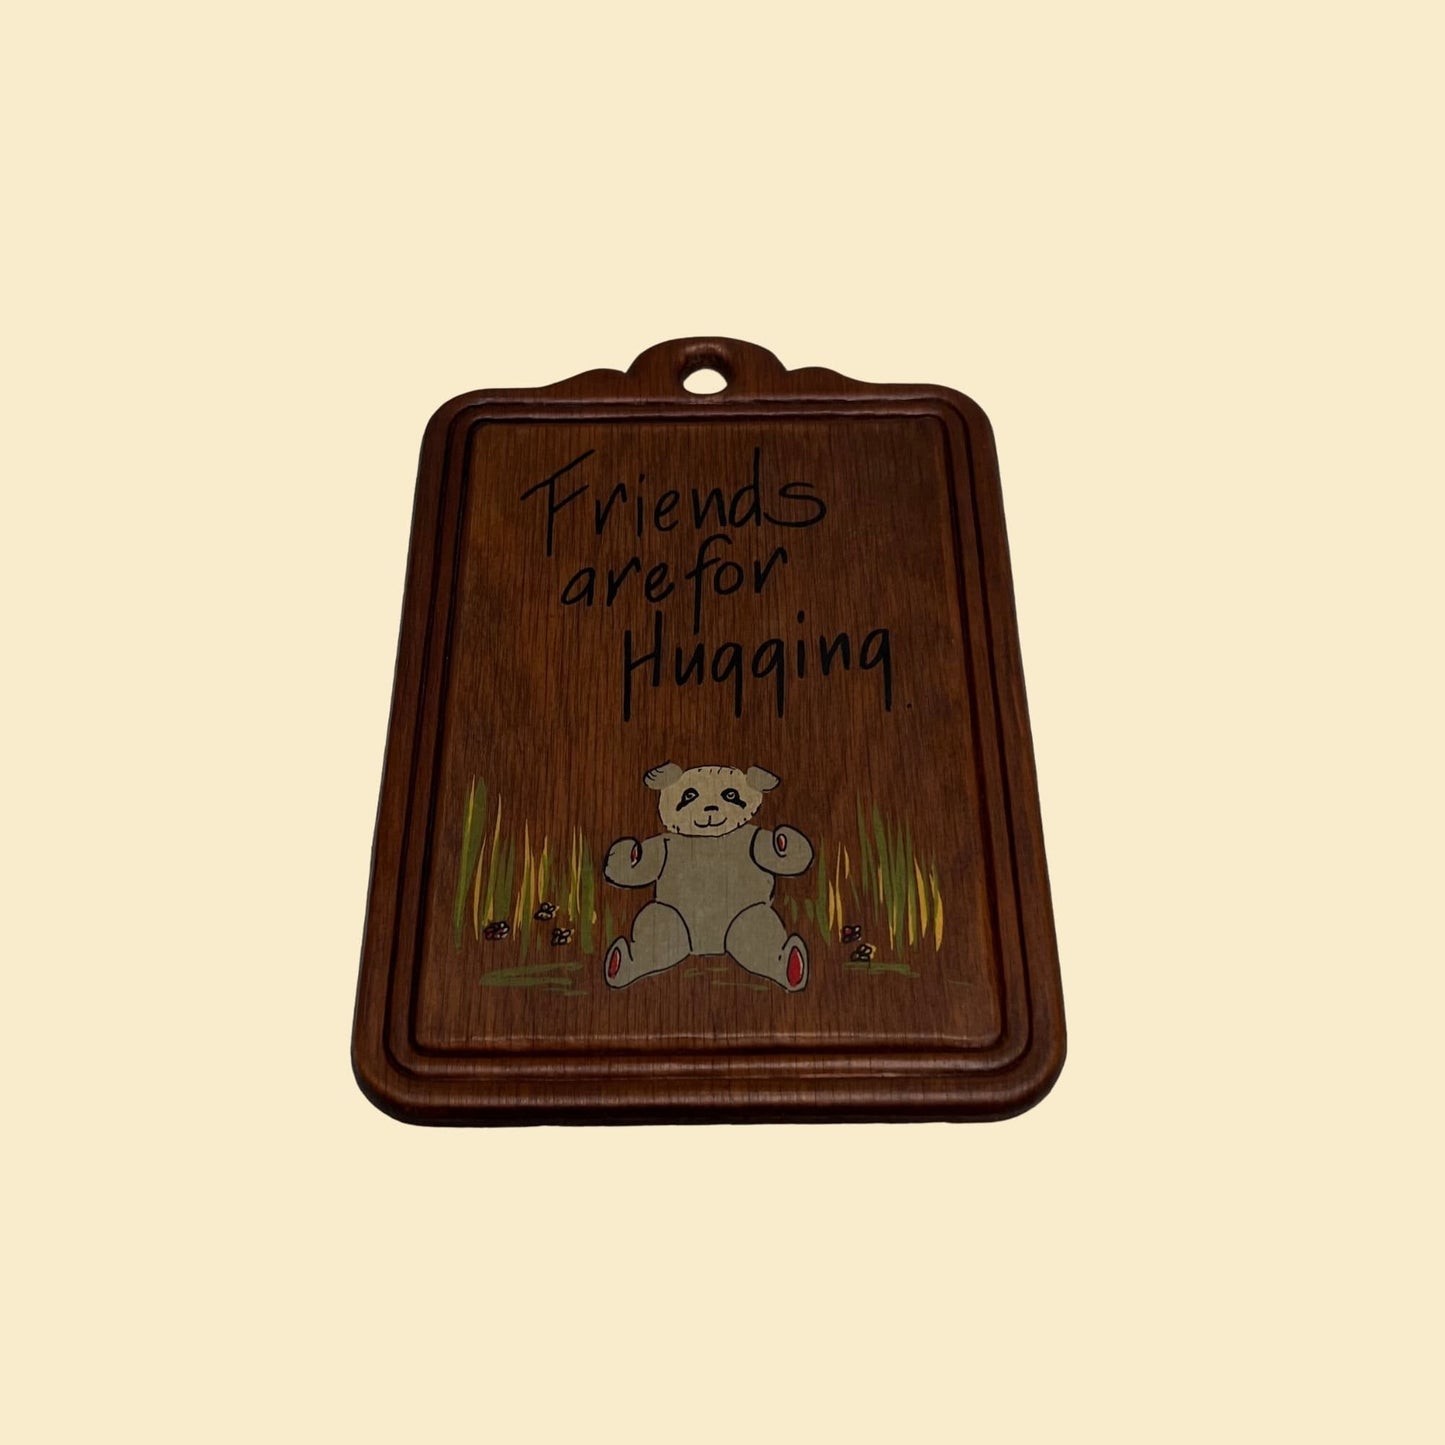 70s wooden bear wall plaque with 'Friends are for Hugging', vintage 1970s wood decor